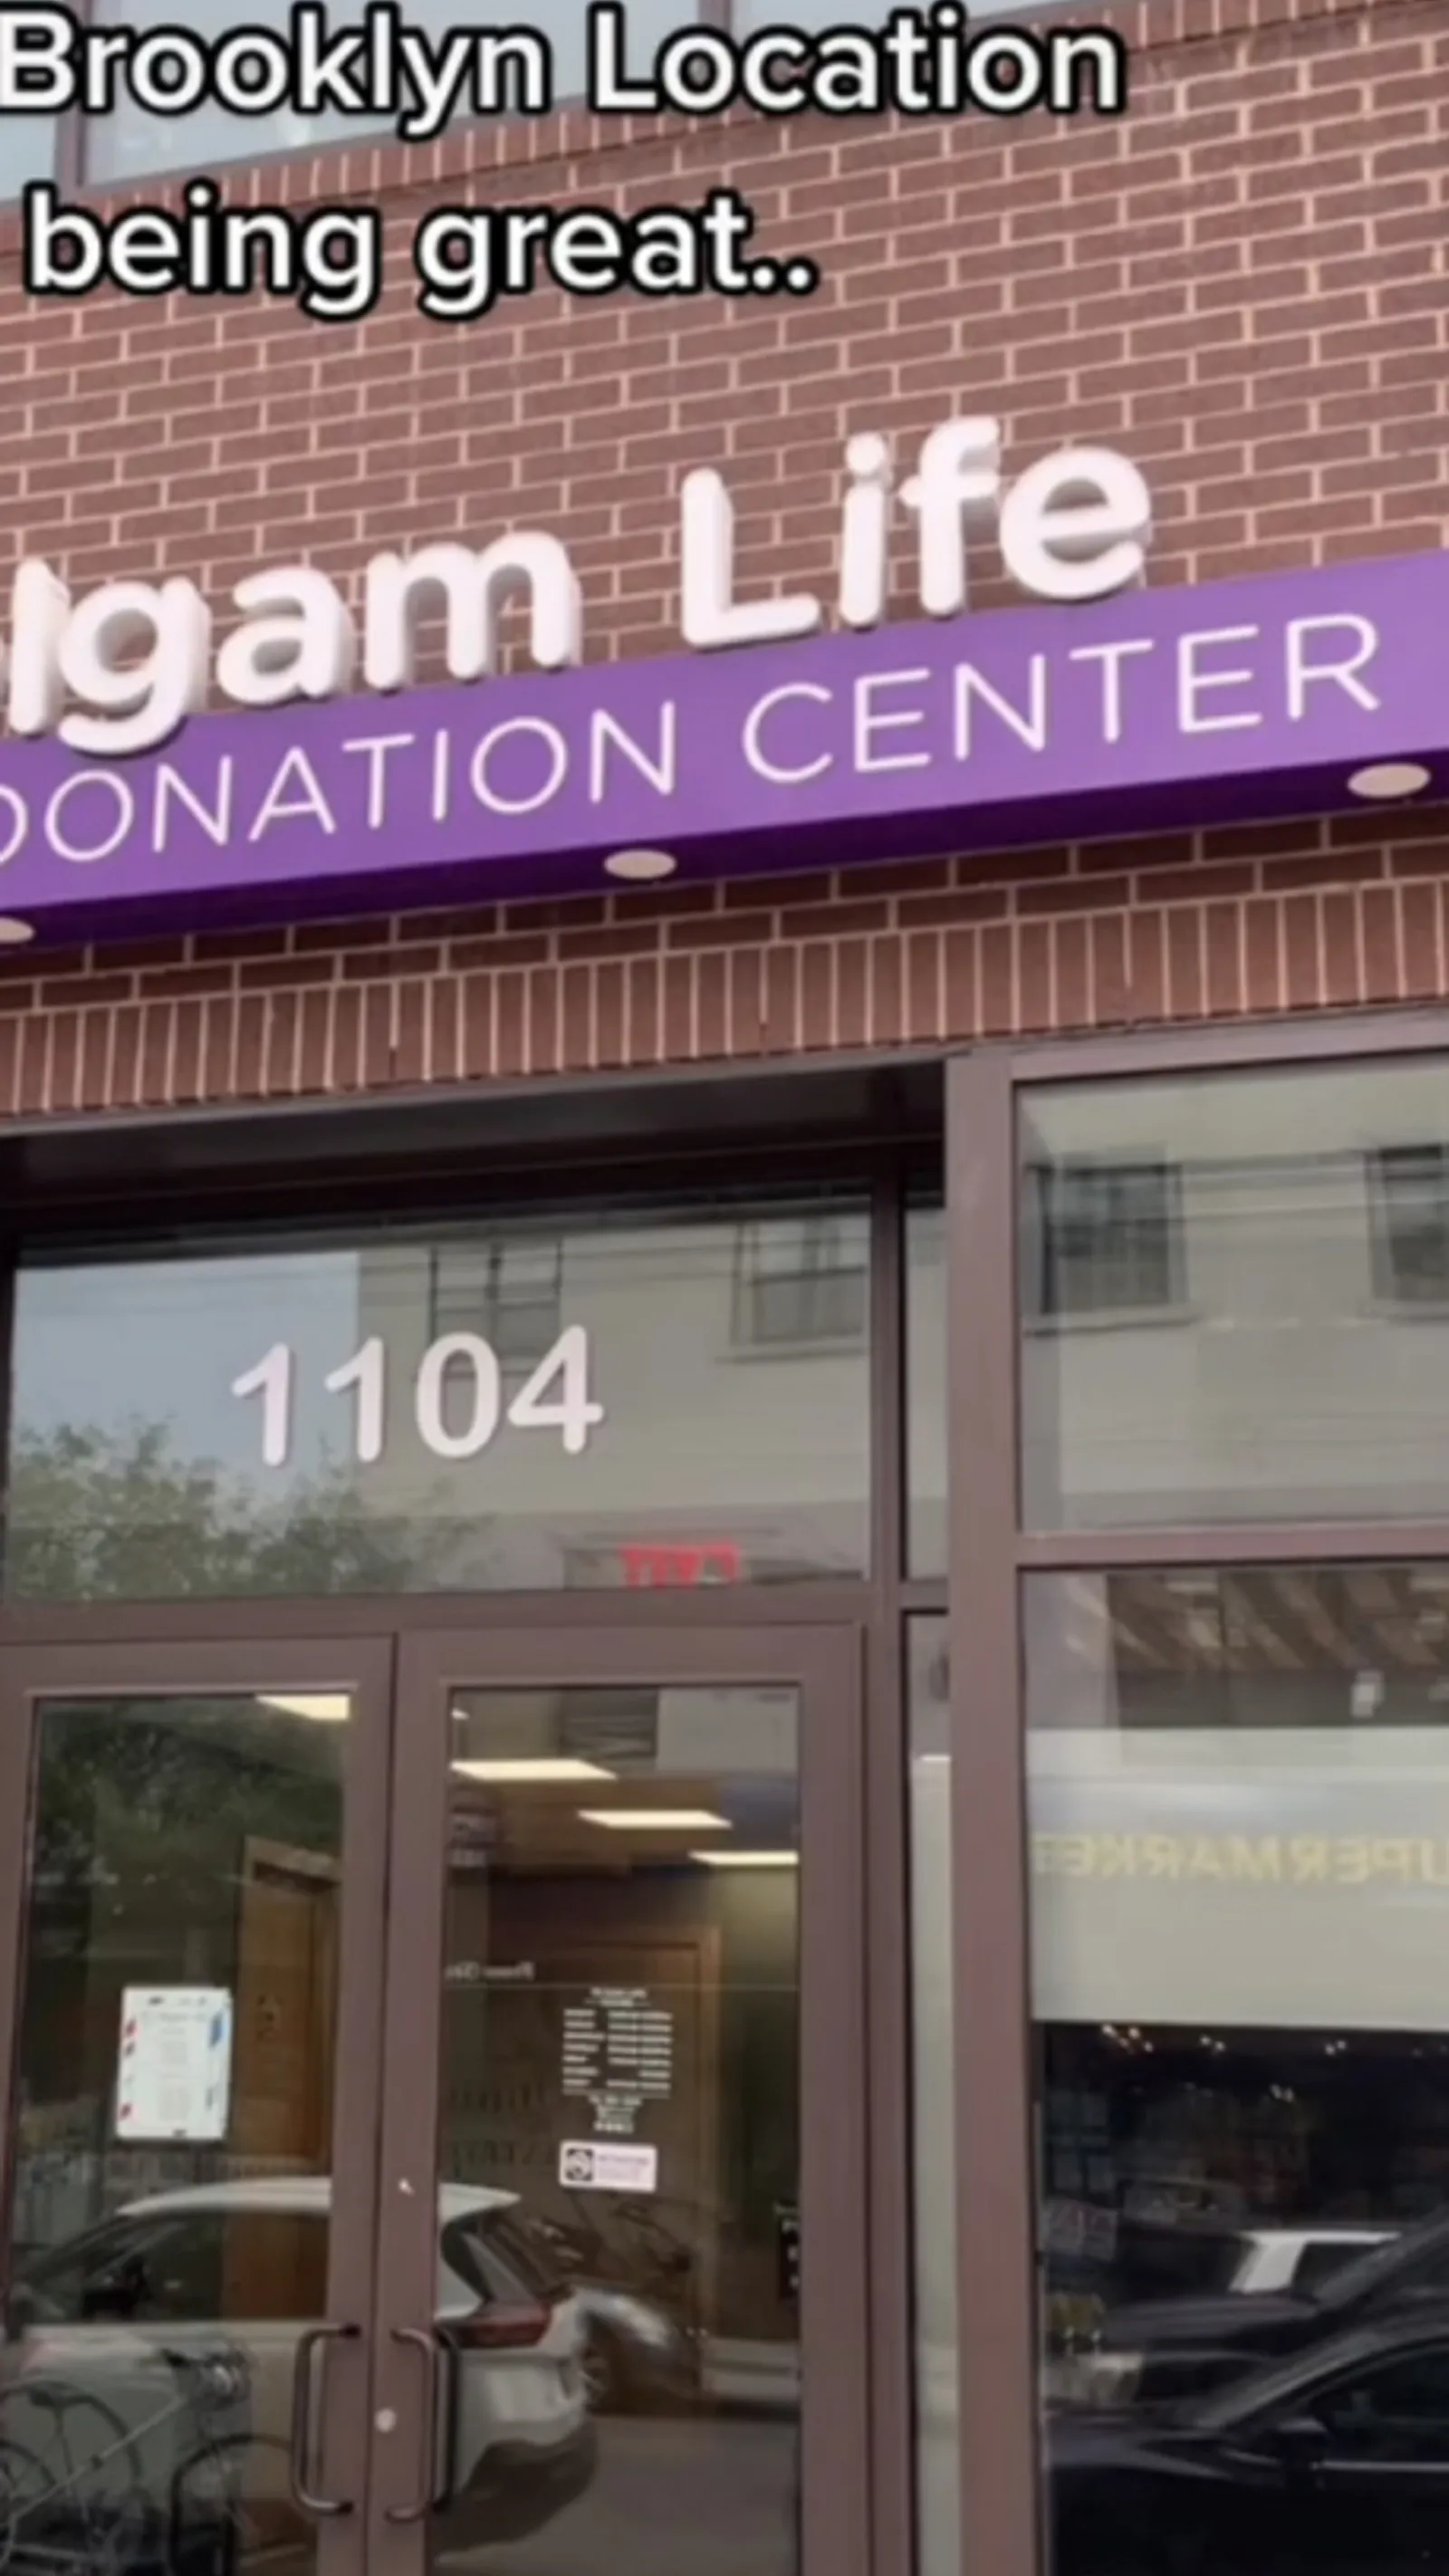 Olgam Life donation center front of building